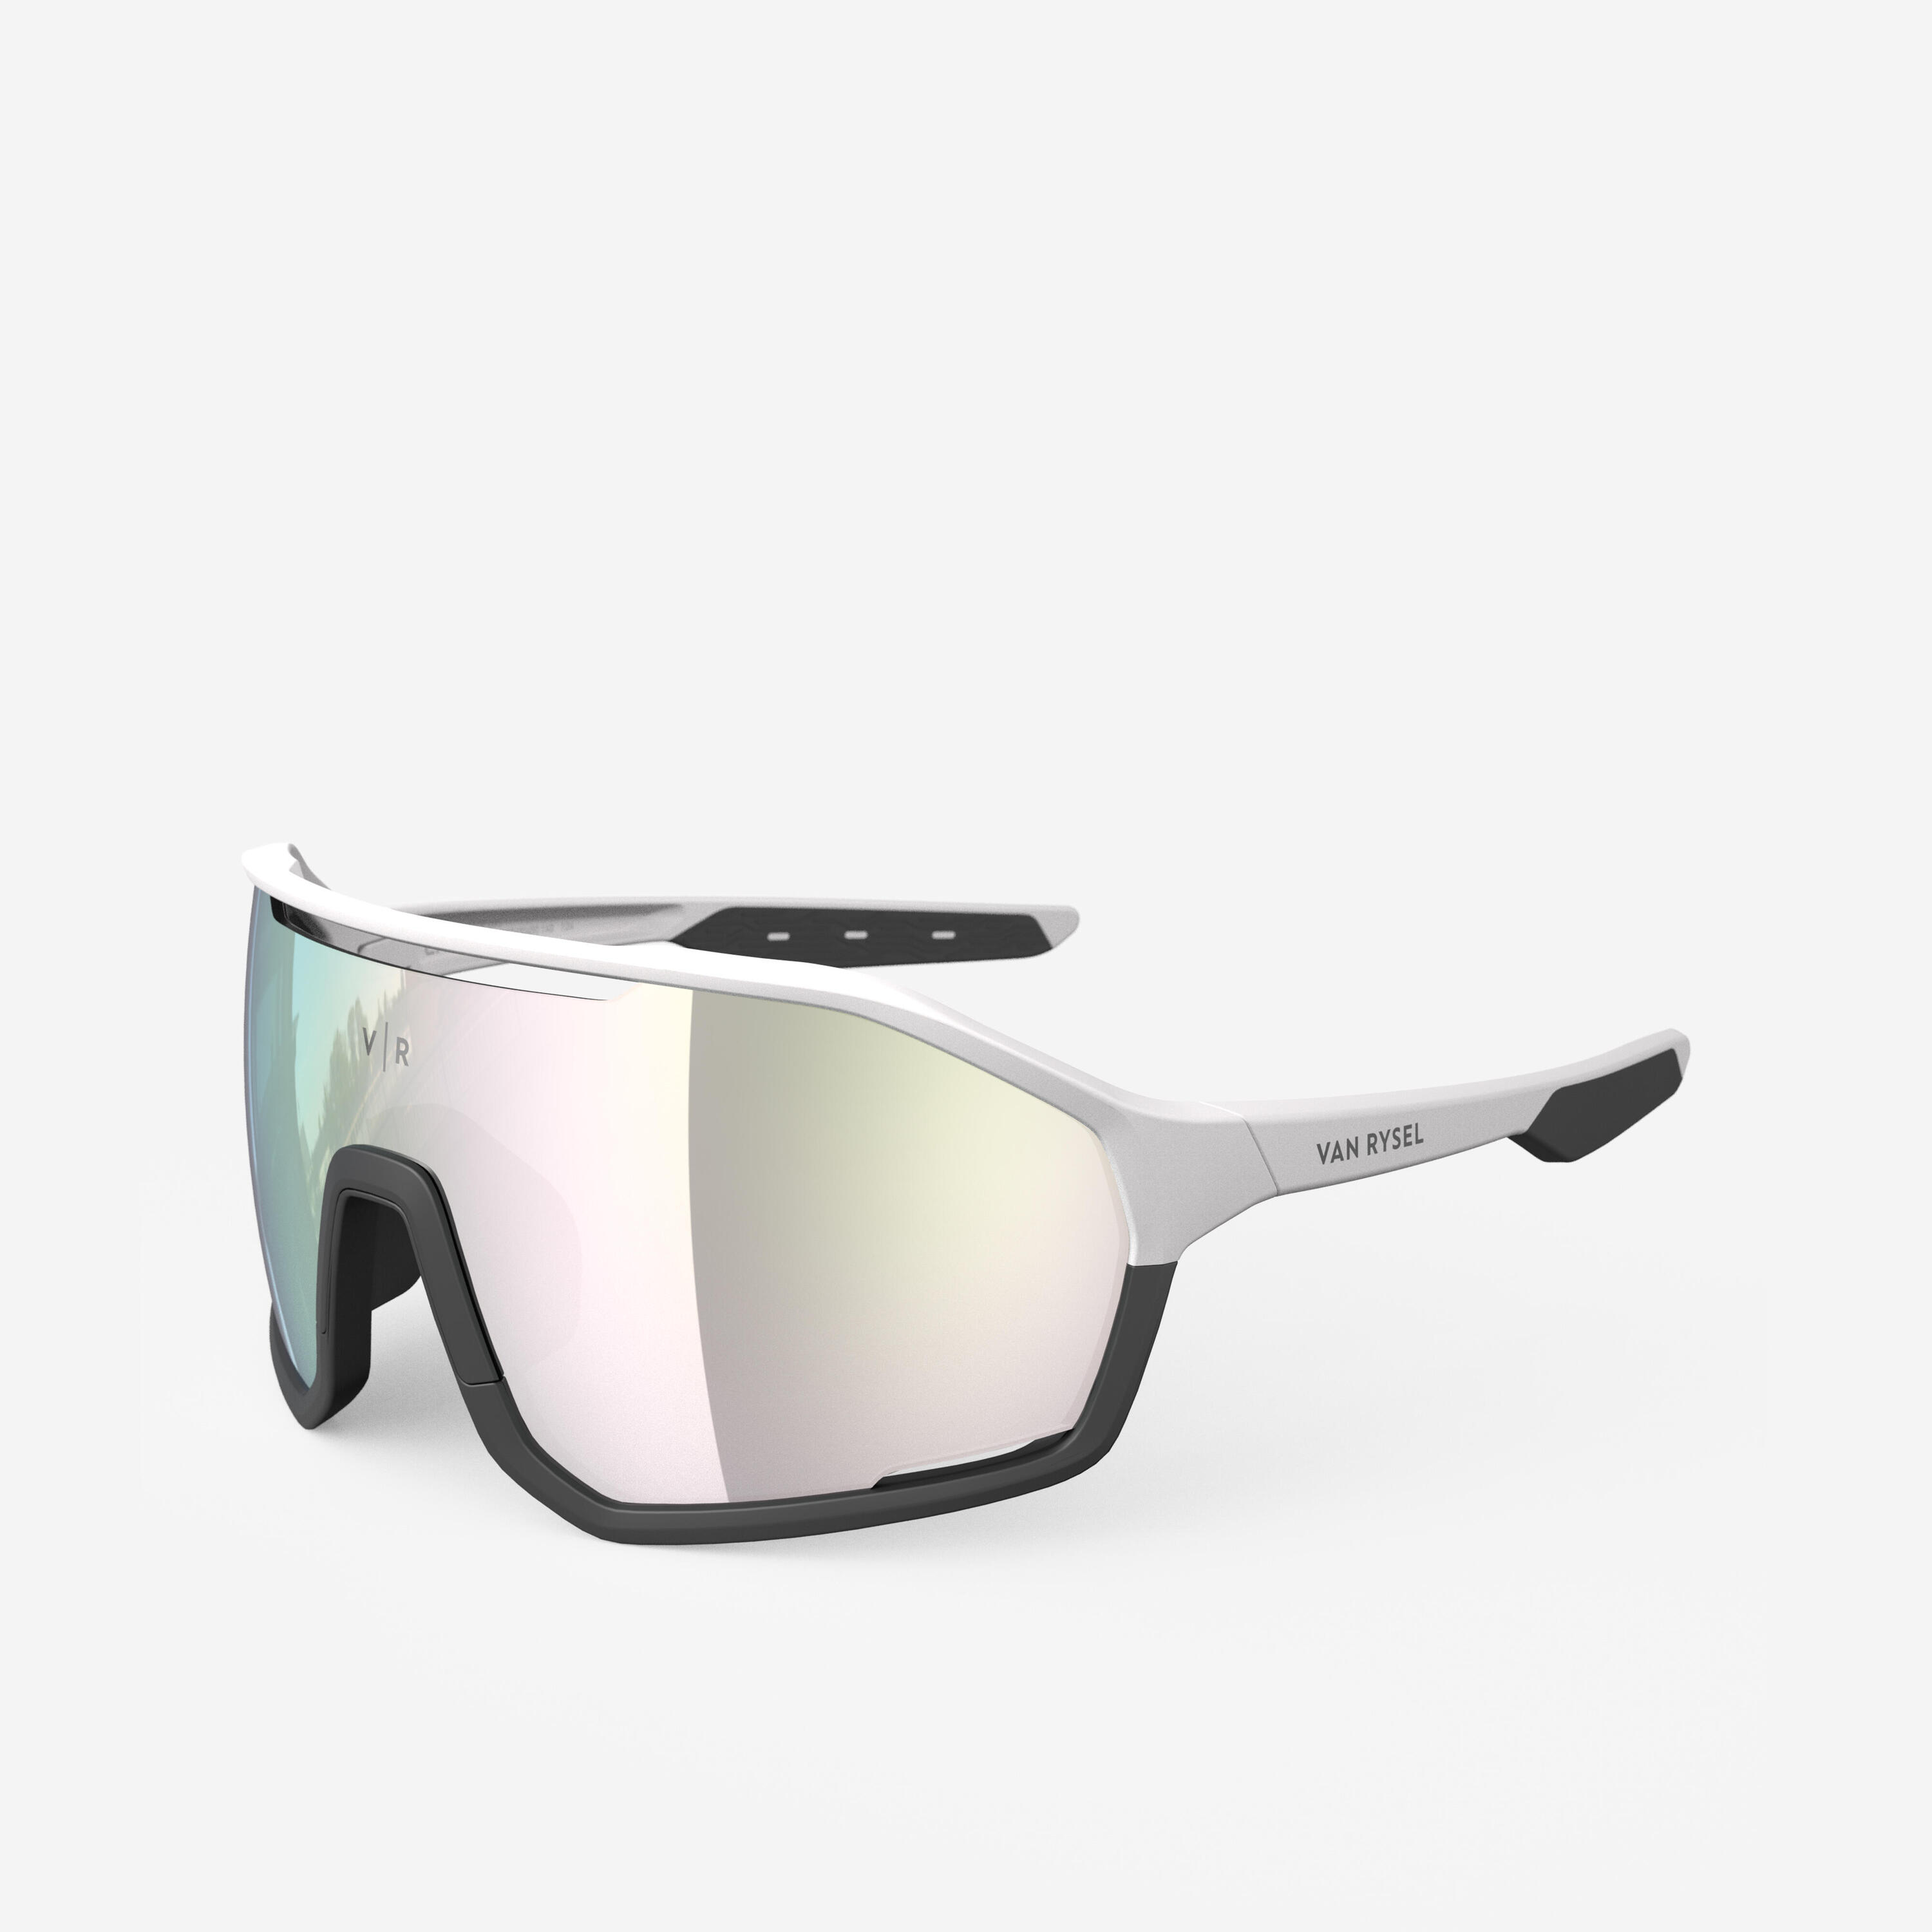 ROCKRIDER Adult Category 3 Cycling Sunglasses Perf 500 - White